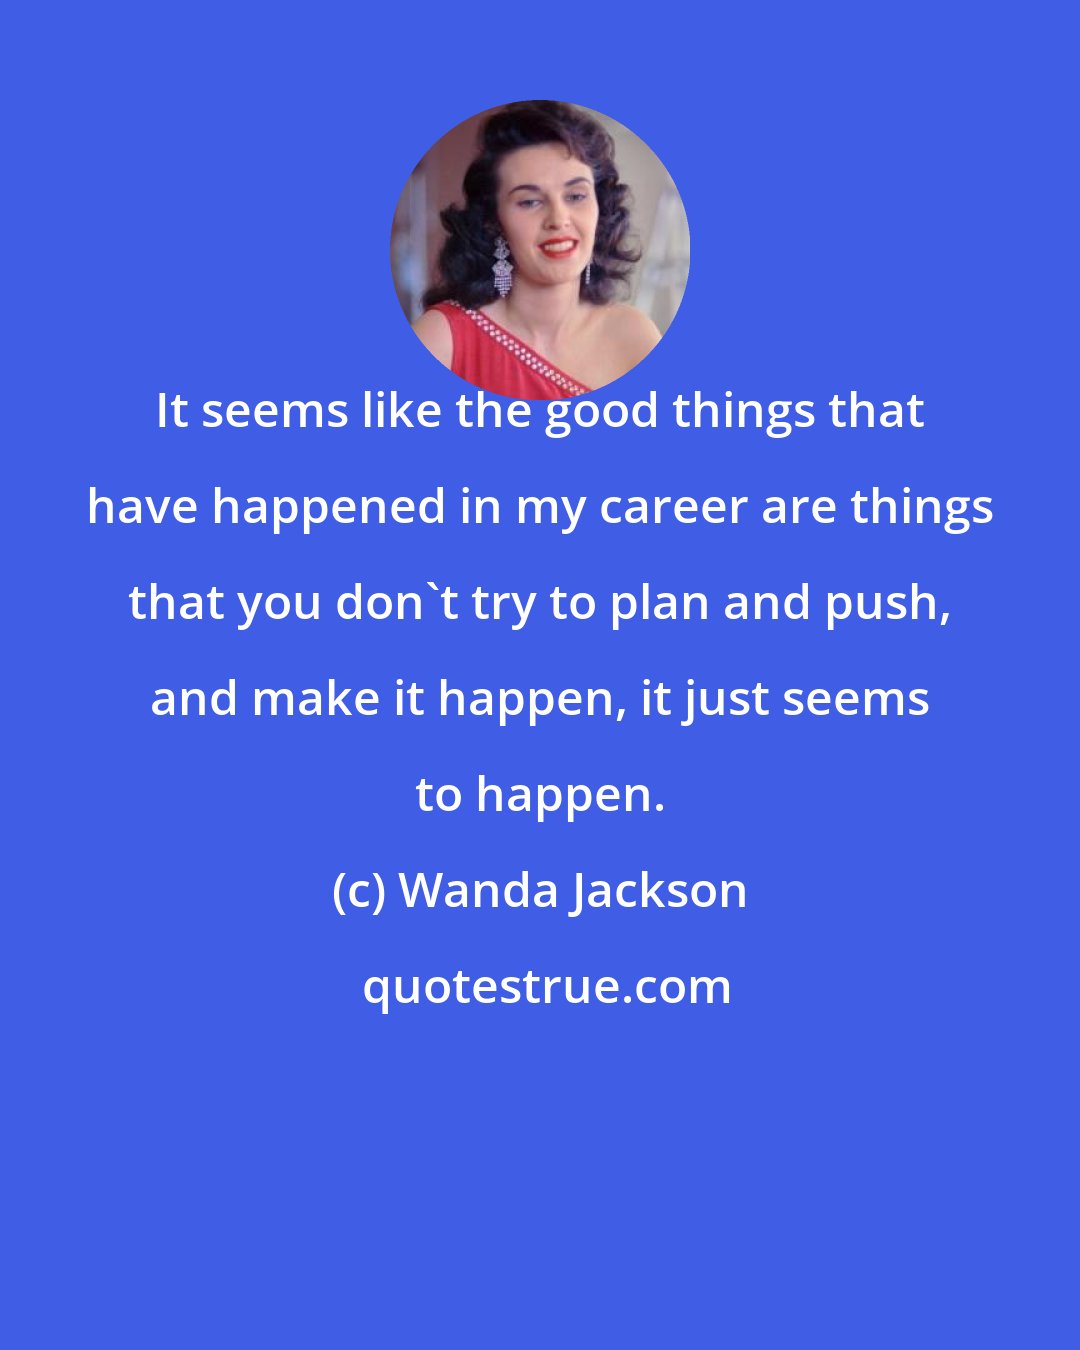 Wanda Jackson: It seems like the good things that have happened in my career are things that you don't try to plan and push, and make it happen, it just seems to happen.